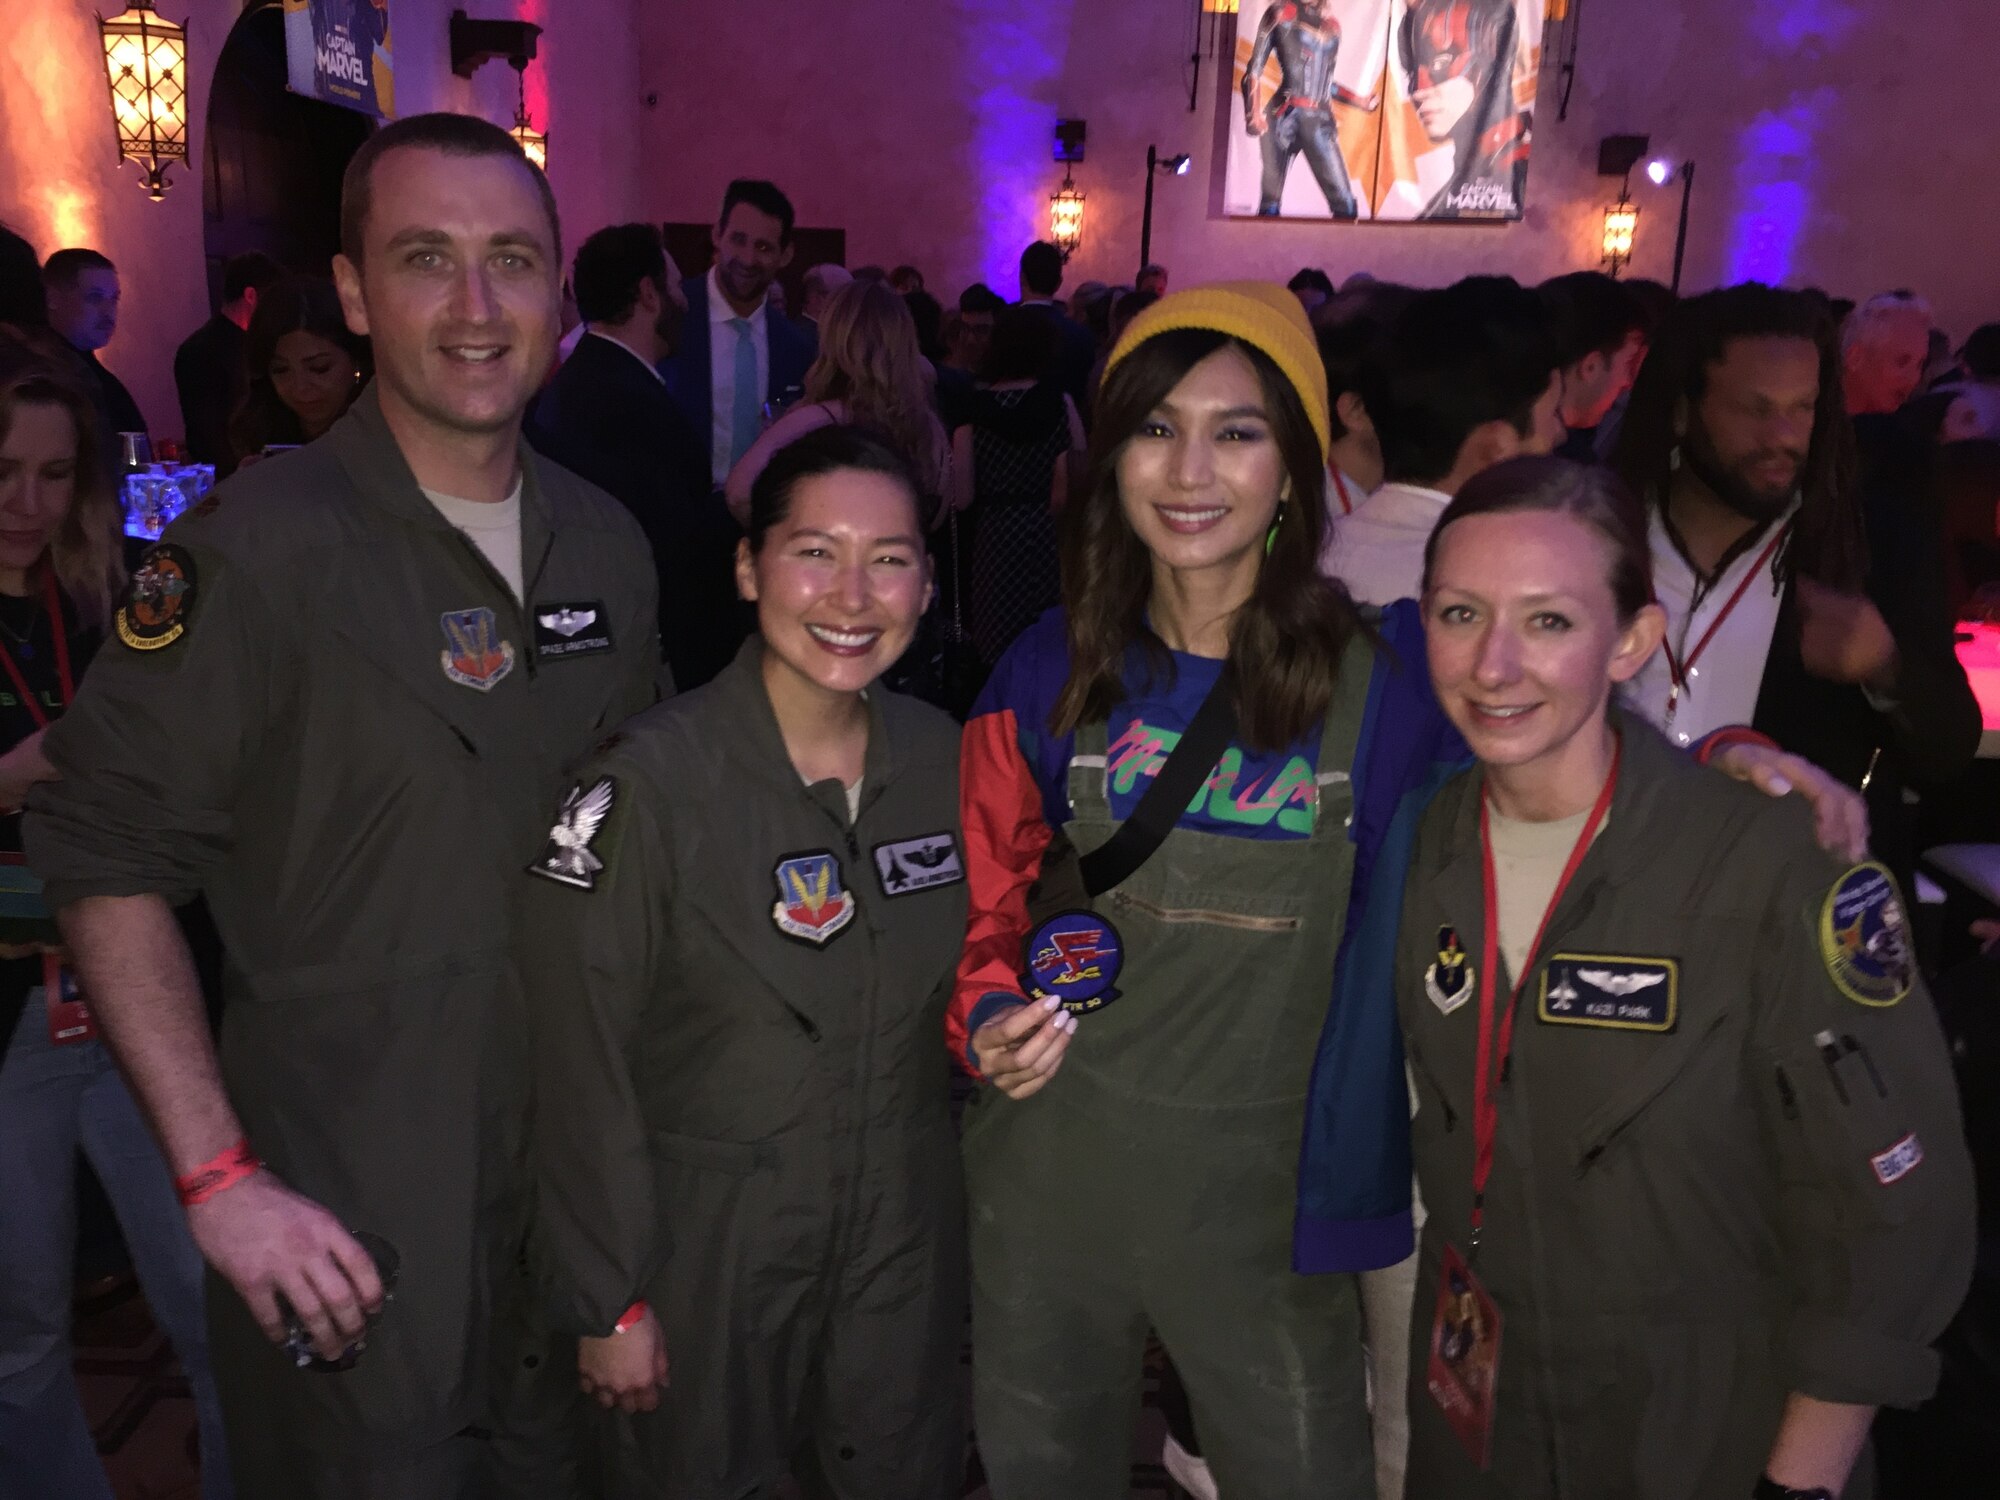 Capt. Danielle Park (right), 311th Fighter Squadron instructor pilot, stands next to Gemma Chan, who plays Doctor Minerva in Captain Marval, while at the premiere of the film in Los Angeles, Calif, March 4, 2019. Park was invited to attend the premiere of Captain Marval after giving the actress, Brie Larson, a ride in an F-16 Fighting Falcon while stationed at Nellis Air Force Base, Nev. (Courtesy photo)